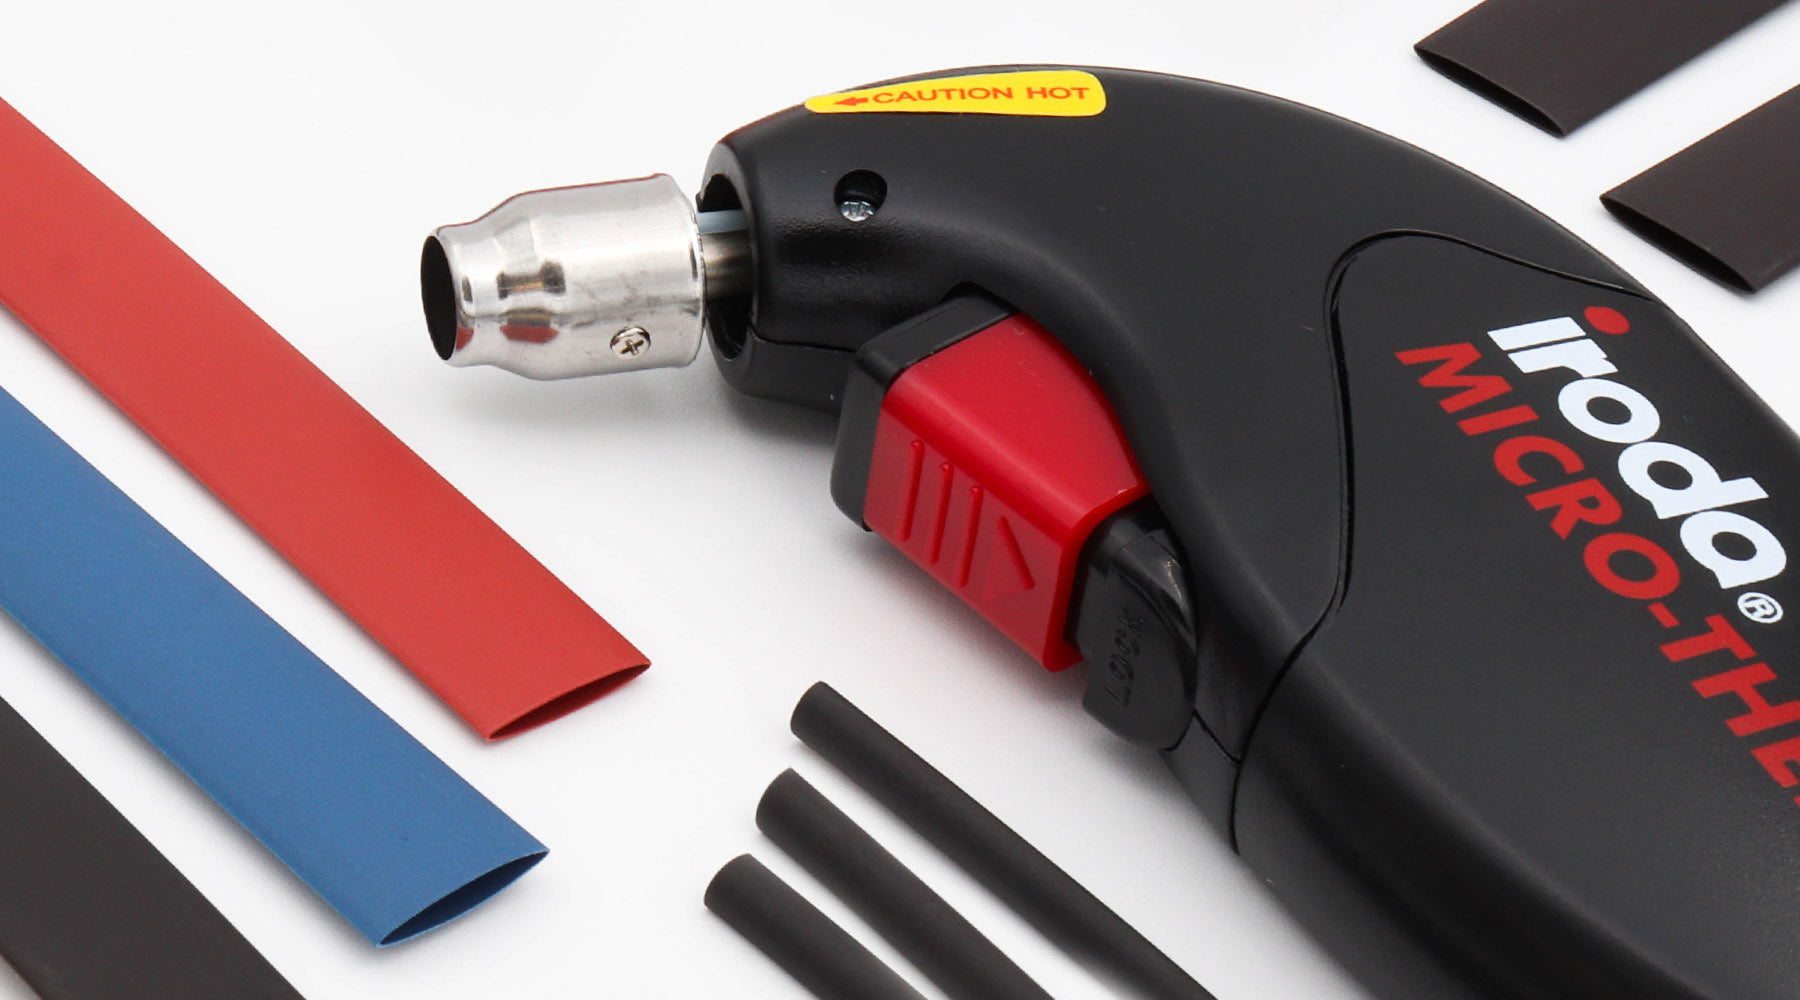 Learn How to Use a Heat Gun and Micro Torch on Heat Shrink Tubing